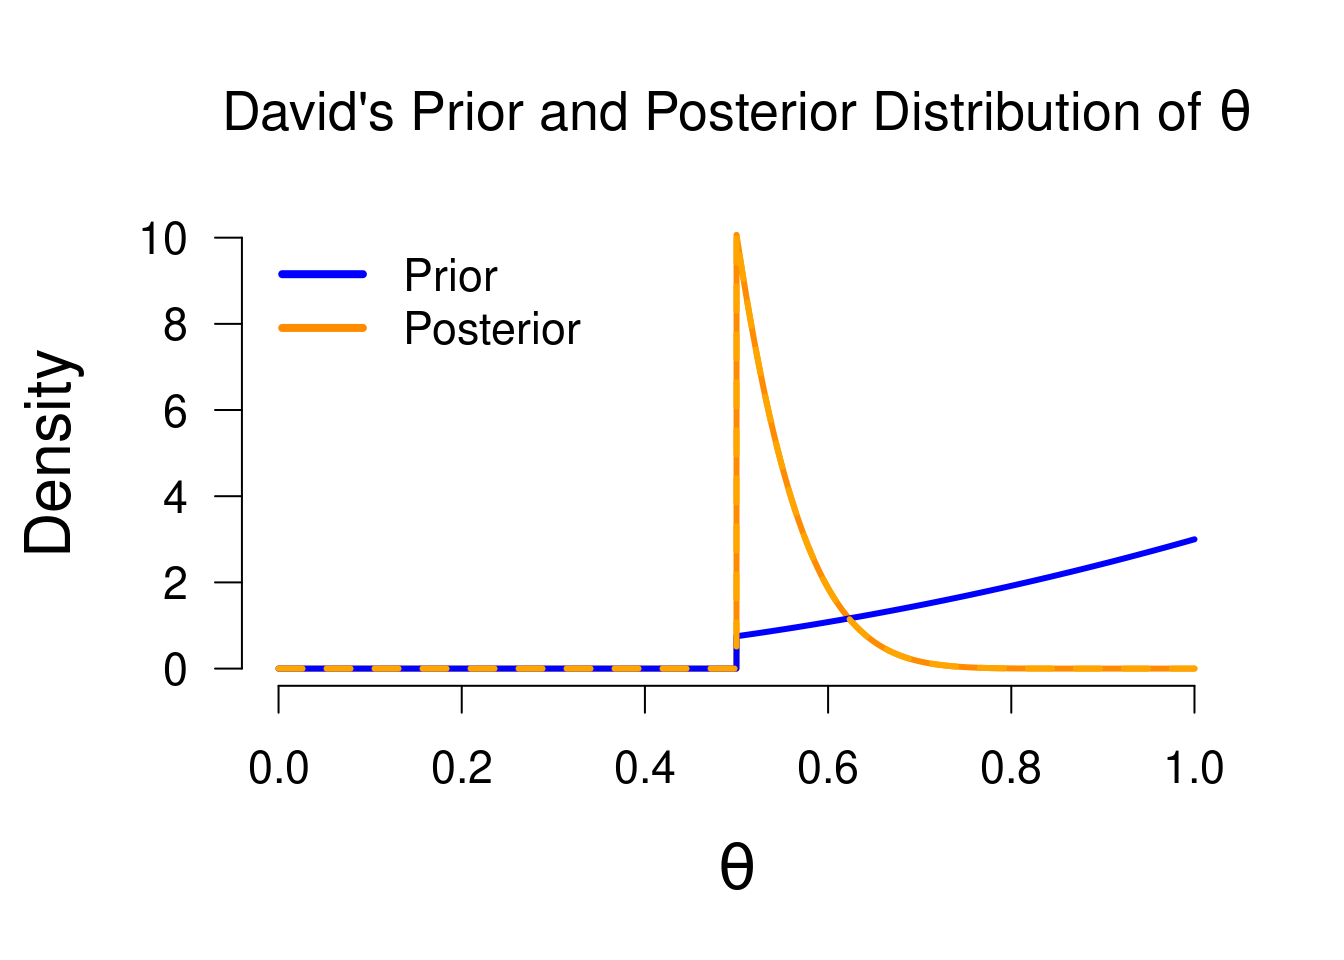 Prior and posterior distribution for David, now with 10 tails and 1 heads. This illustrates how a one-sided model can give misleading estimates: the posterior median and credible interval here will still favor values greater than 0.5, even though the data give quite some evidence for lower values.